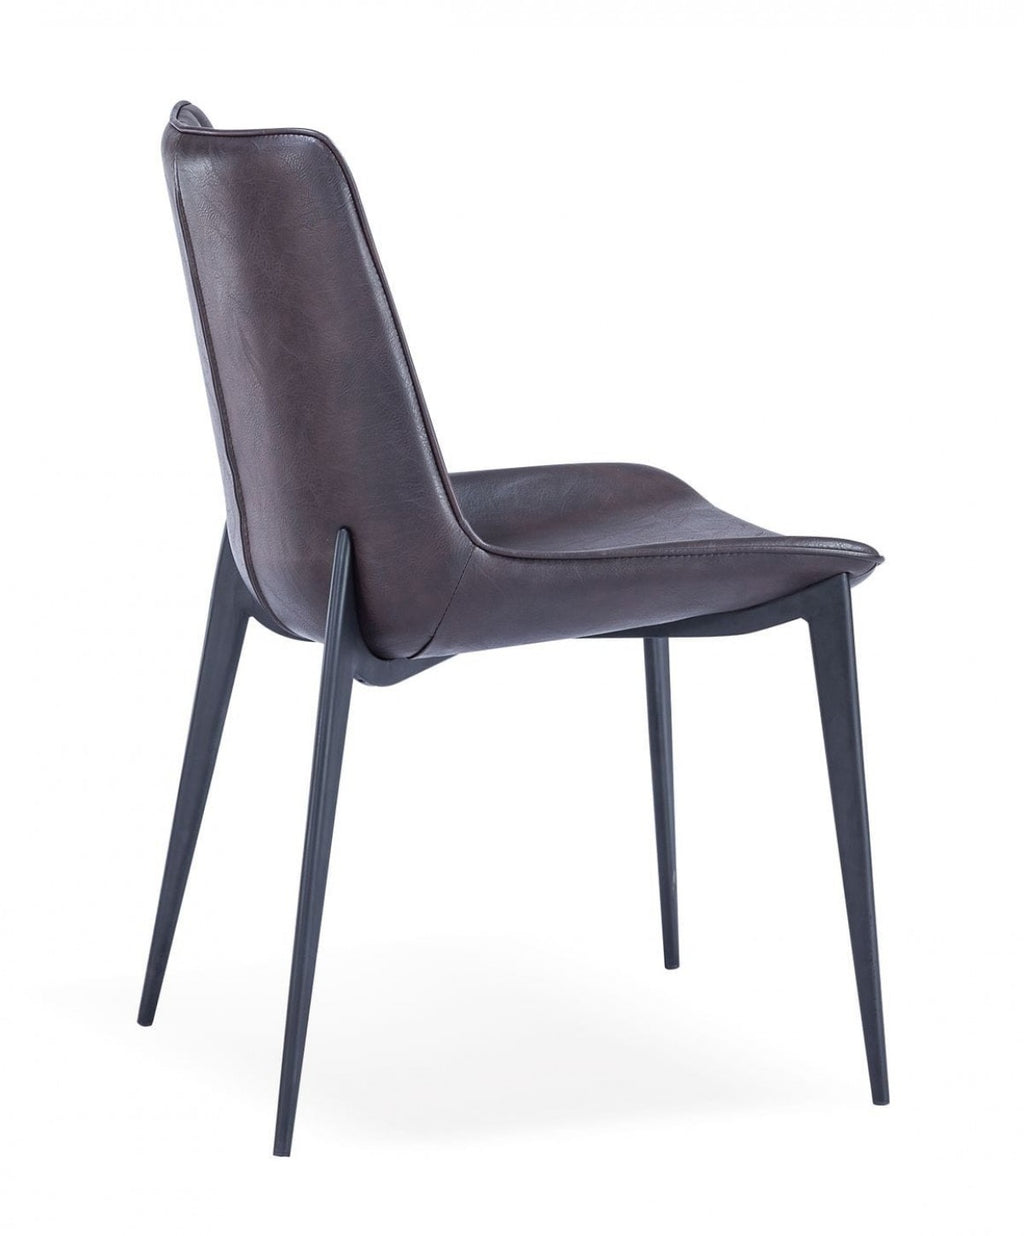 Set of Two Brown Black Modern Dining Chairs - 99fab 